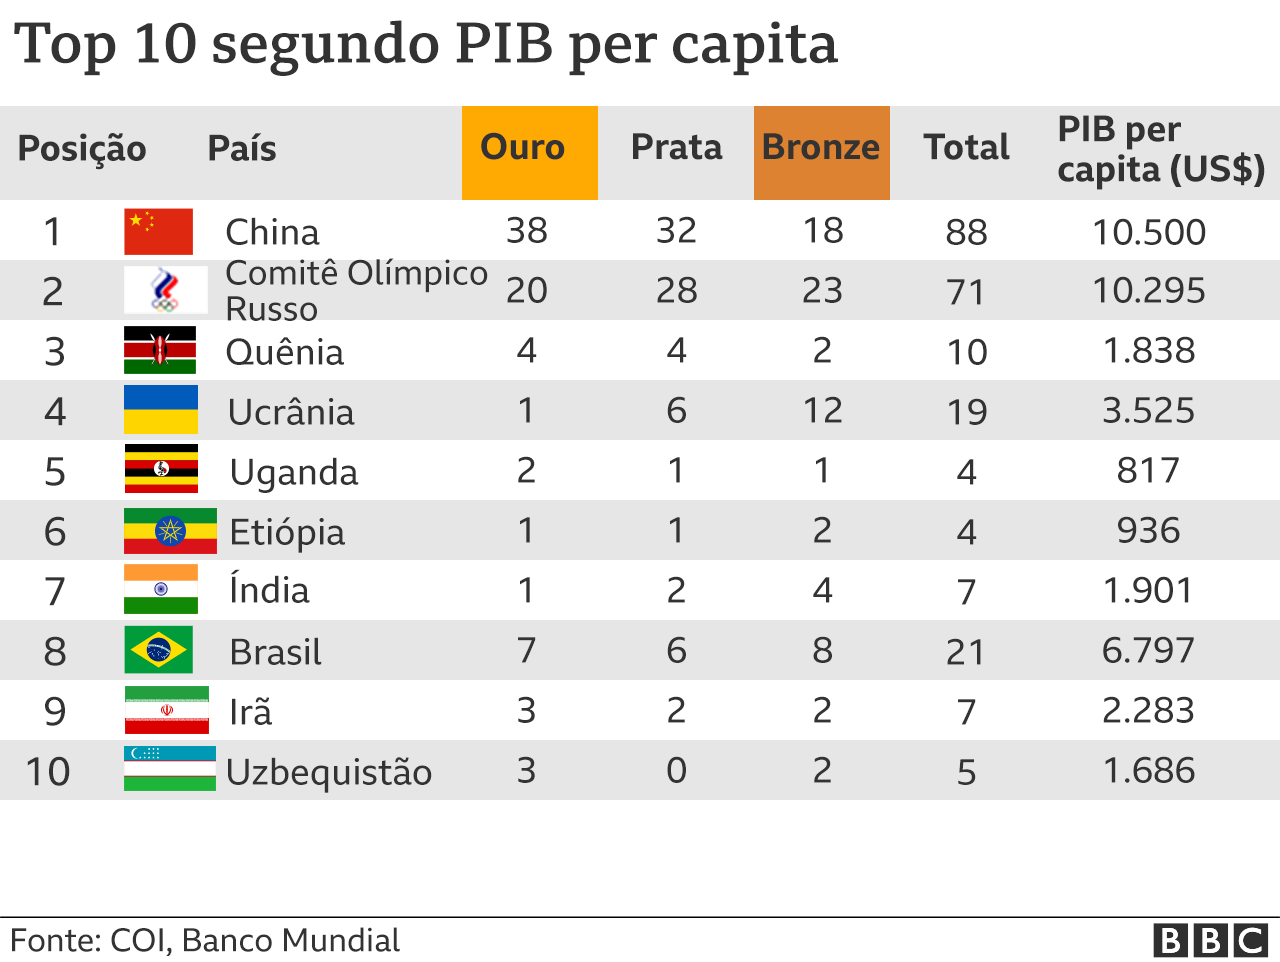 The table shows the medal table by per capita GDP